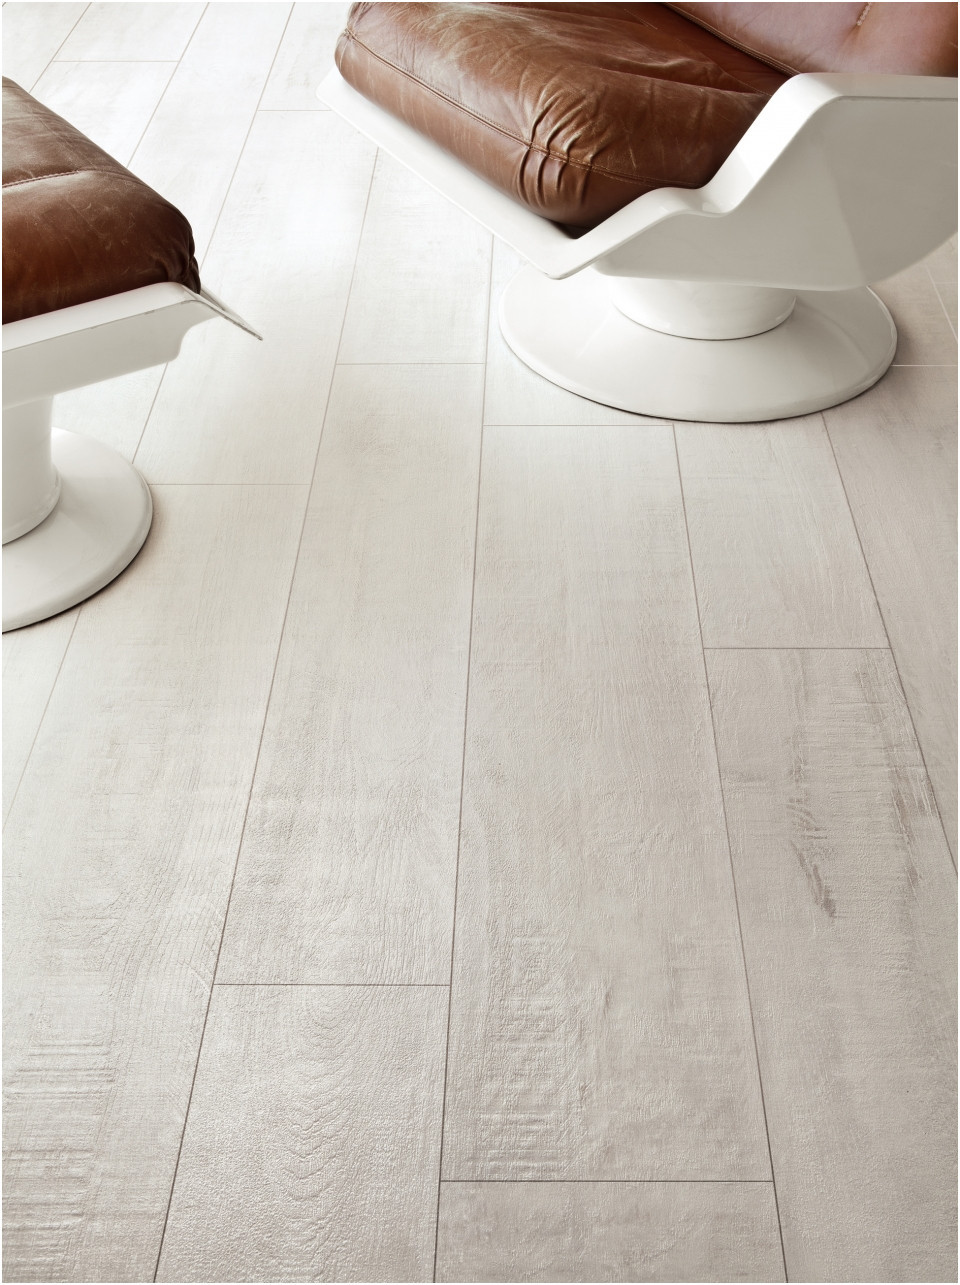 17 Stylish Lowes Hardwood Floor Transition 2024 free download lowes hardwood floor transition of non slip stair treads lowes luxury shop particle board at lowes com pertaining to non slip stair treads lowes beautiful ceramic tiles wood look tile lowes 